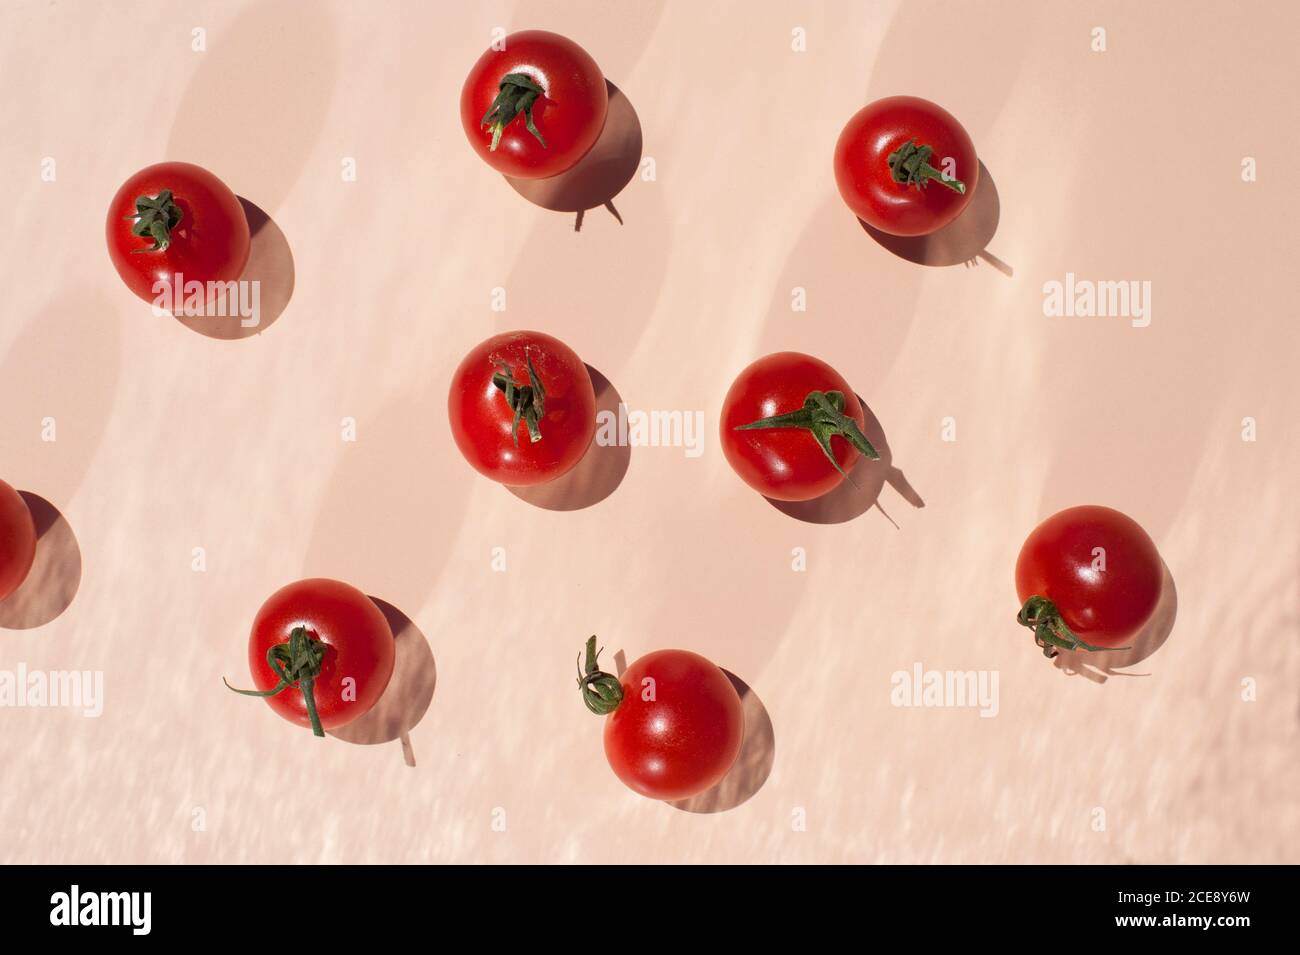 Top view of bunch of ripe red cherry tomatoes with green stems placed on beige background Stock Photo